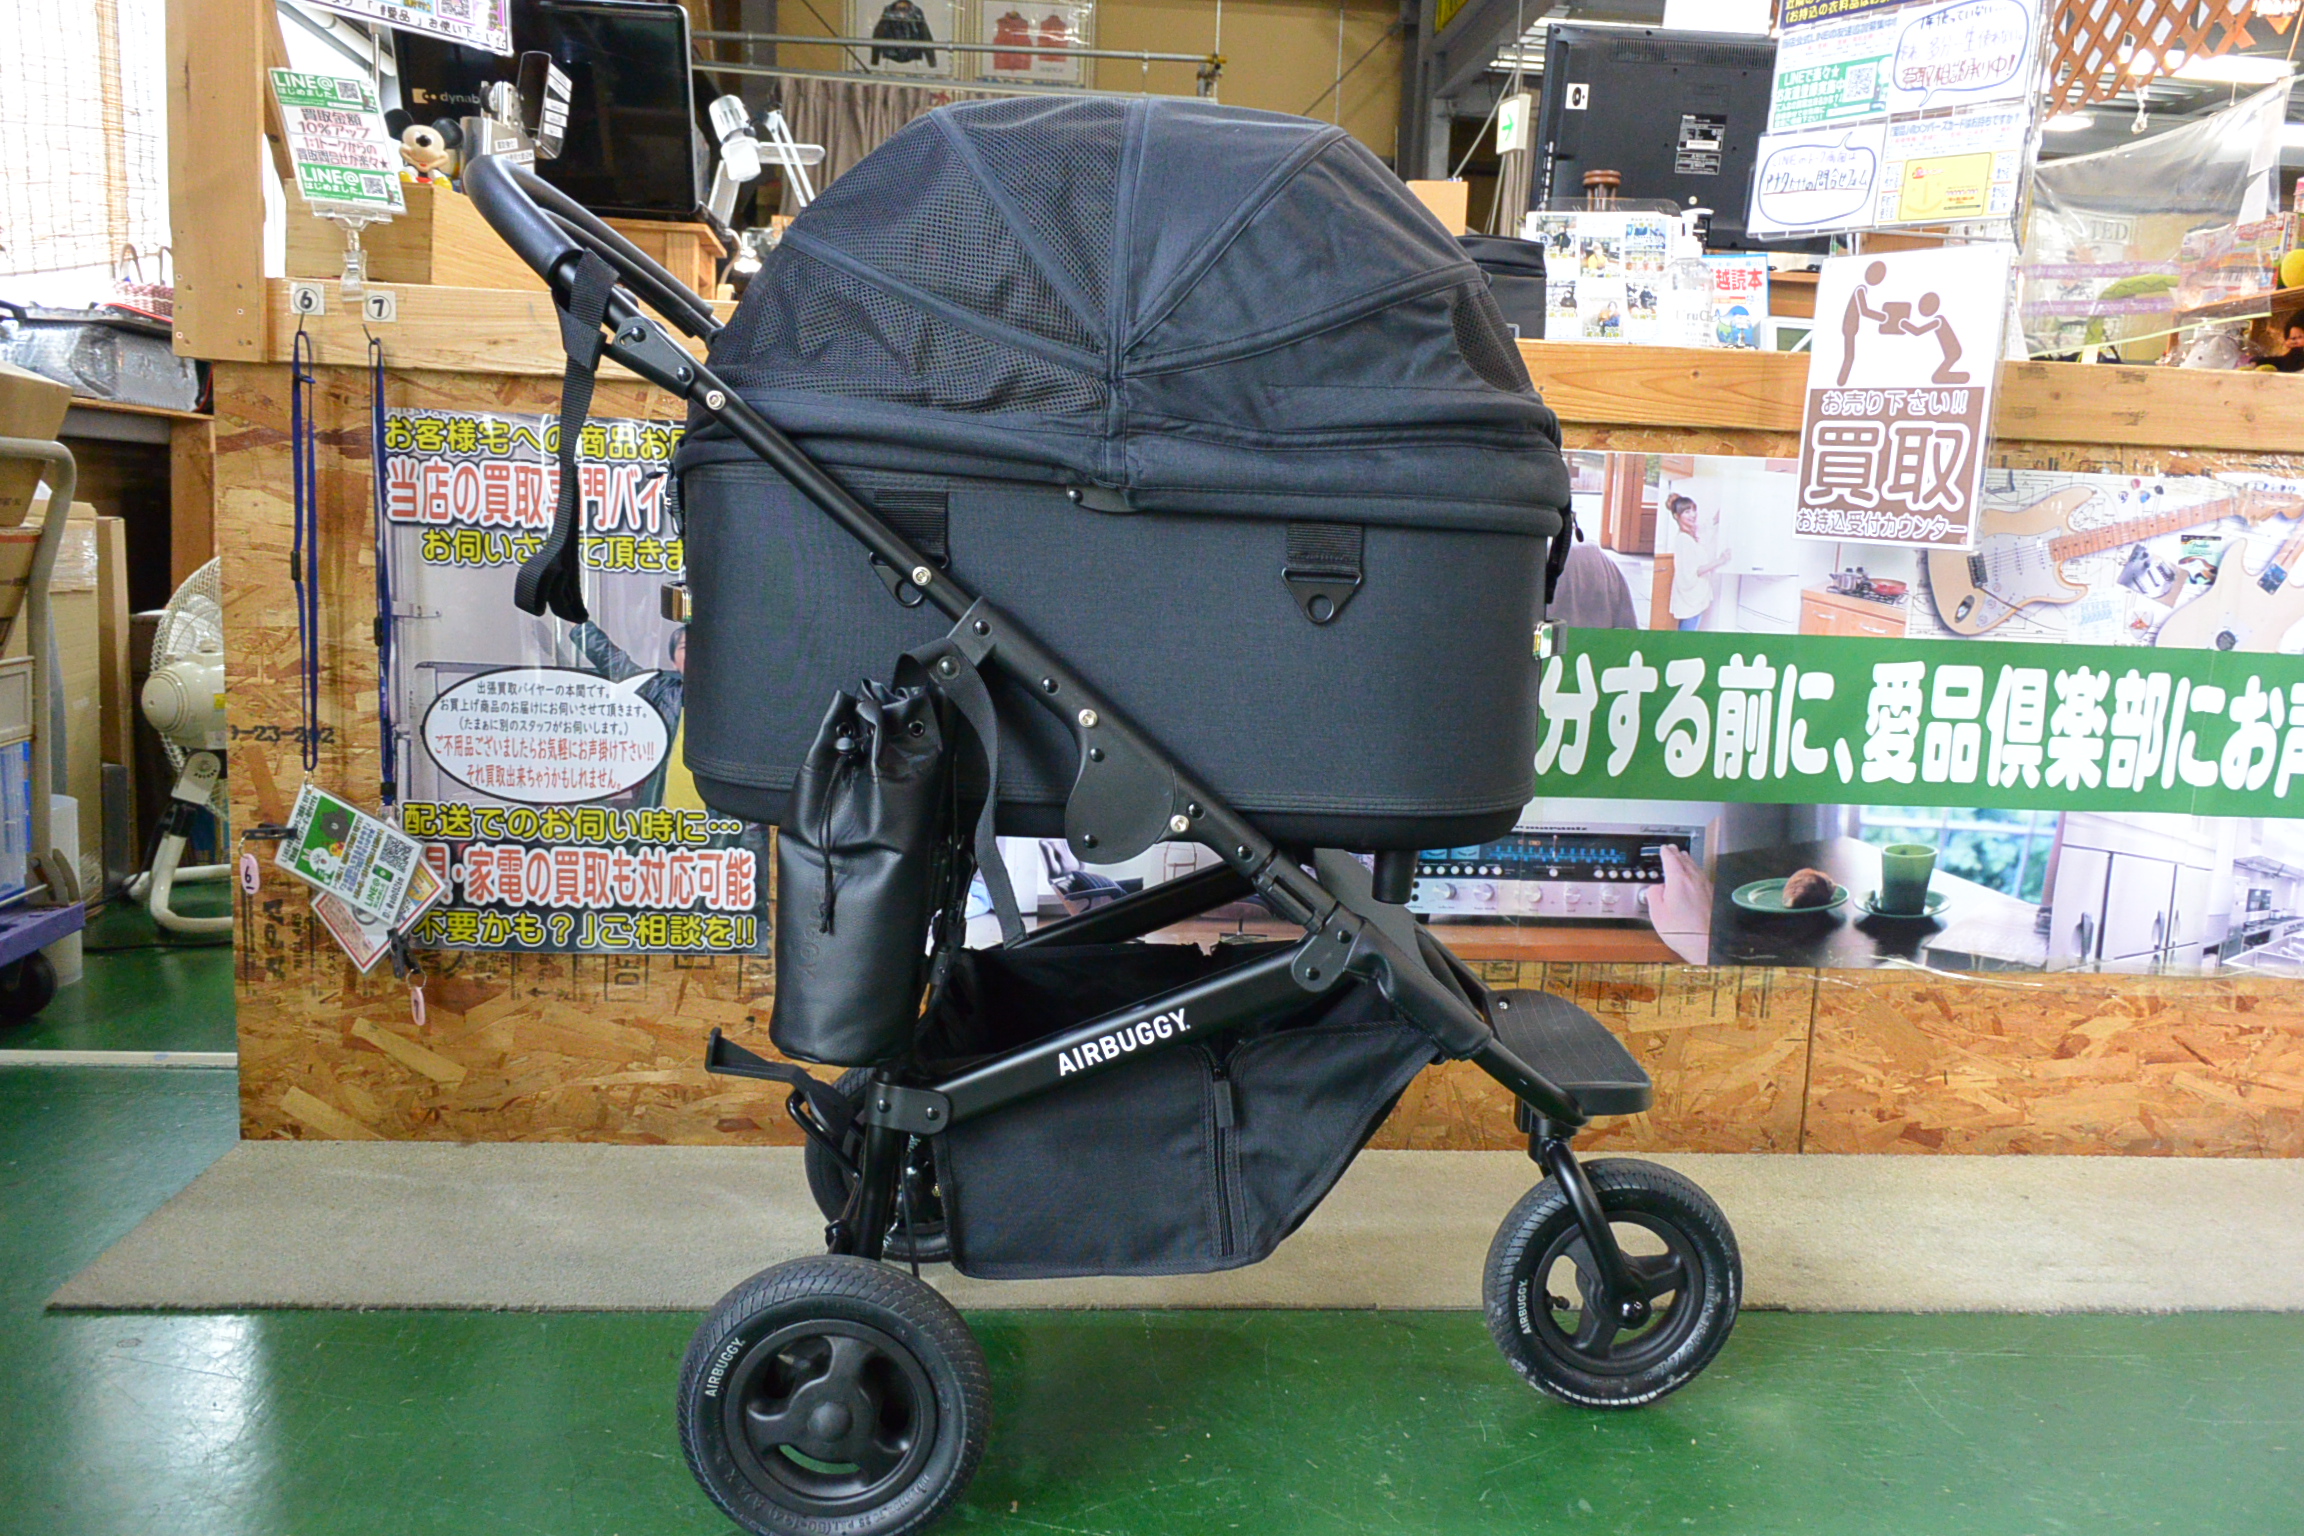 AIRBUGGY for pet Dome3 Large ペットキャリー買取させて頂き